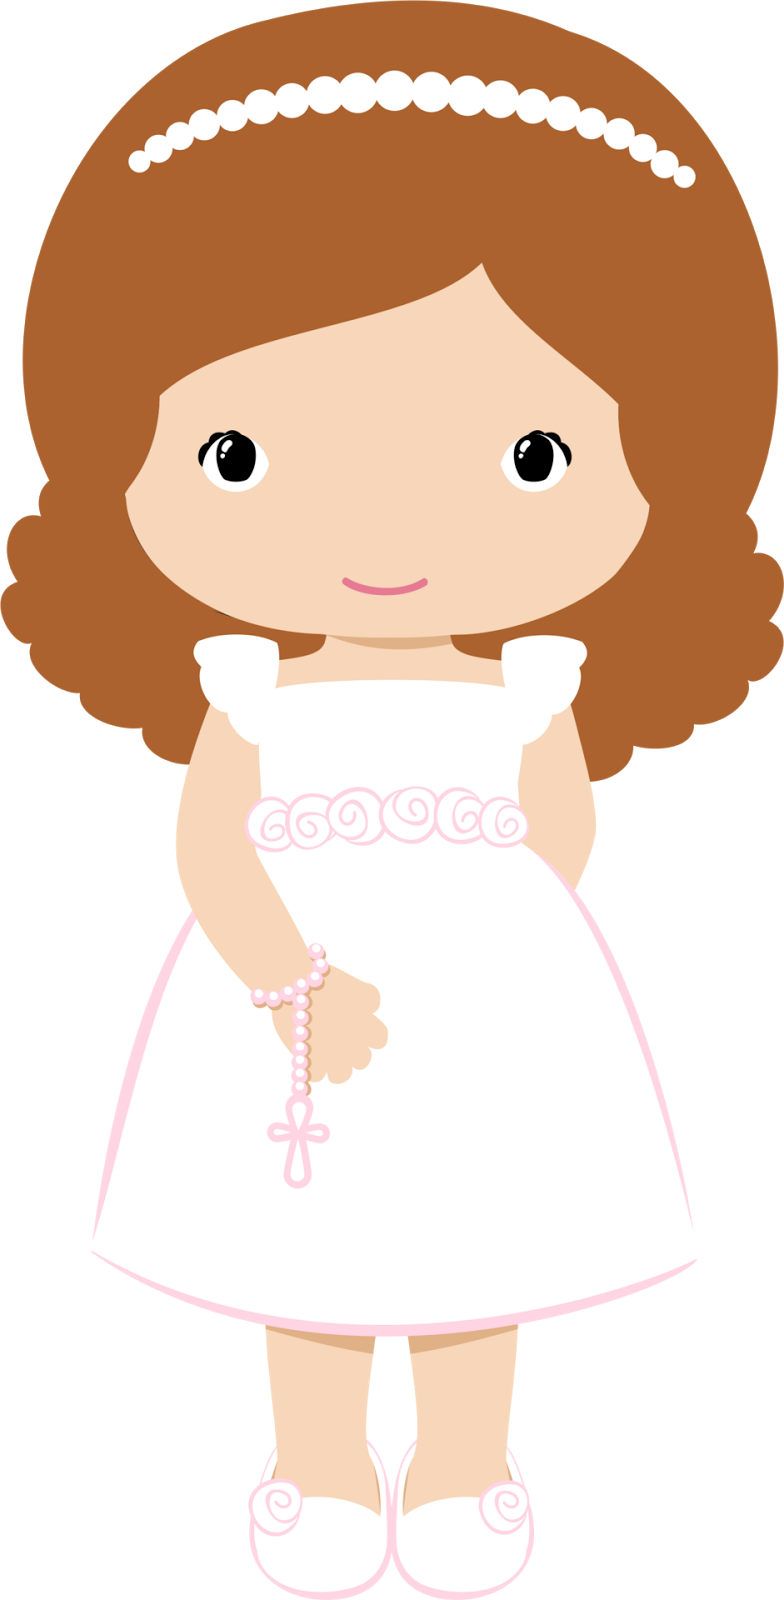 Communion clipart printable first, Communion printable first